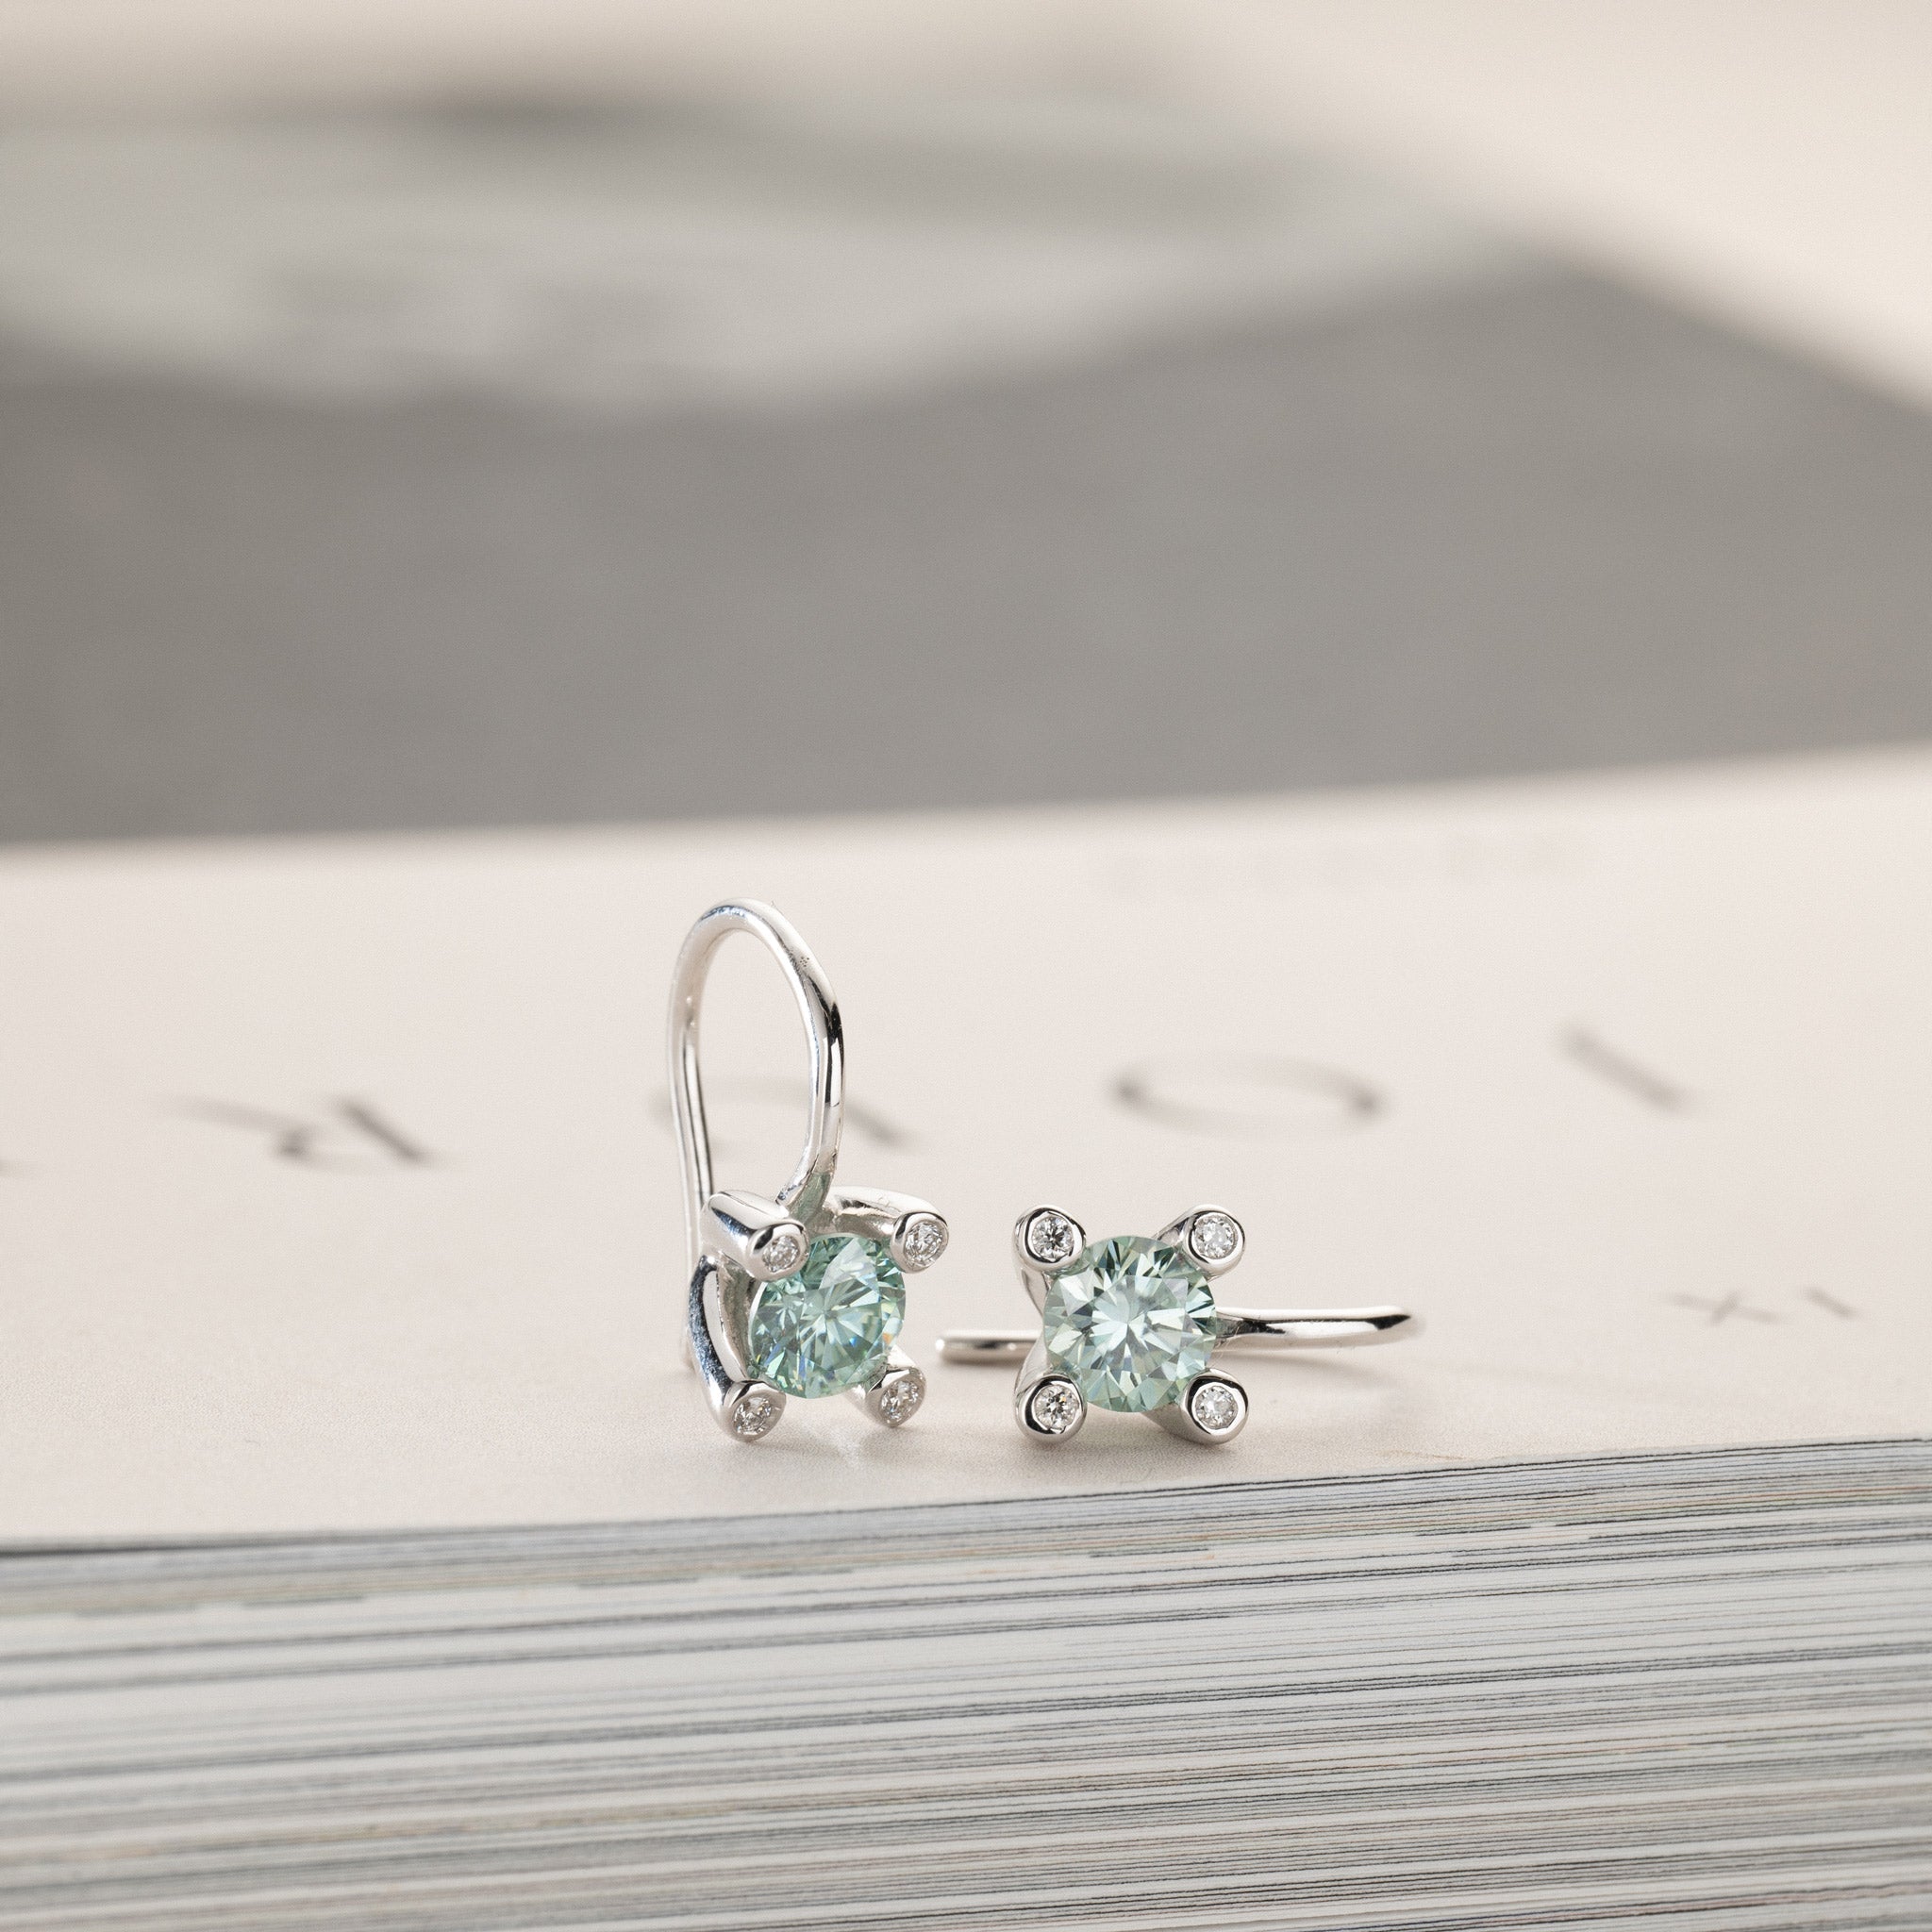 2x0.50ct green moissanite solitaire earrings silver diamonds in crown Miriam